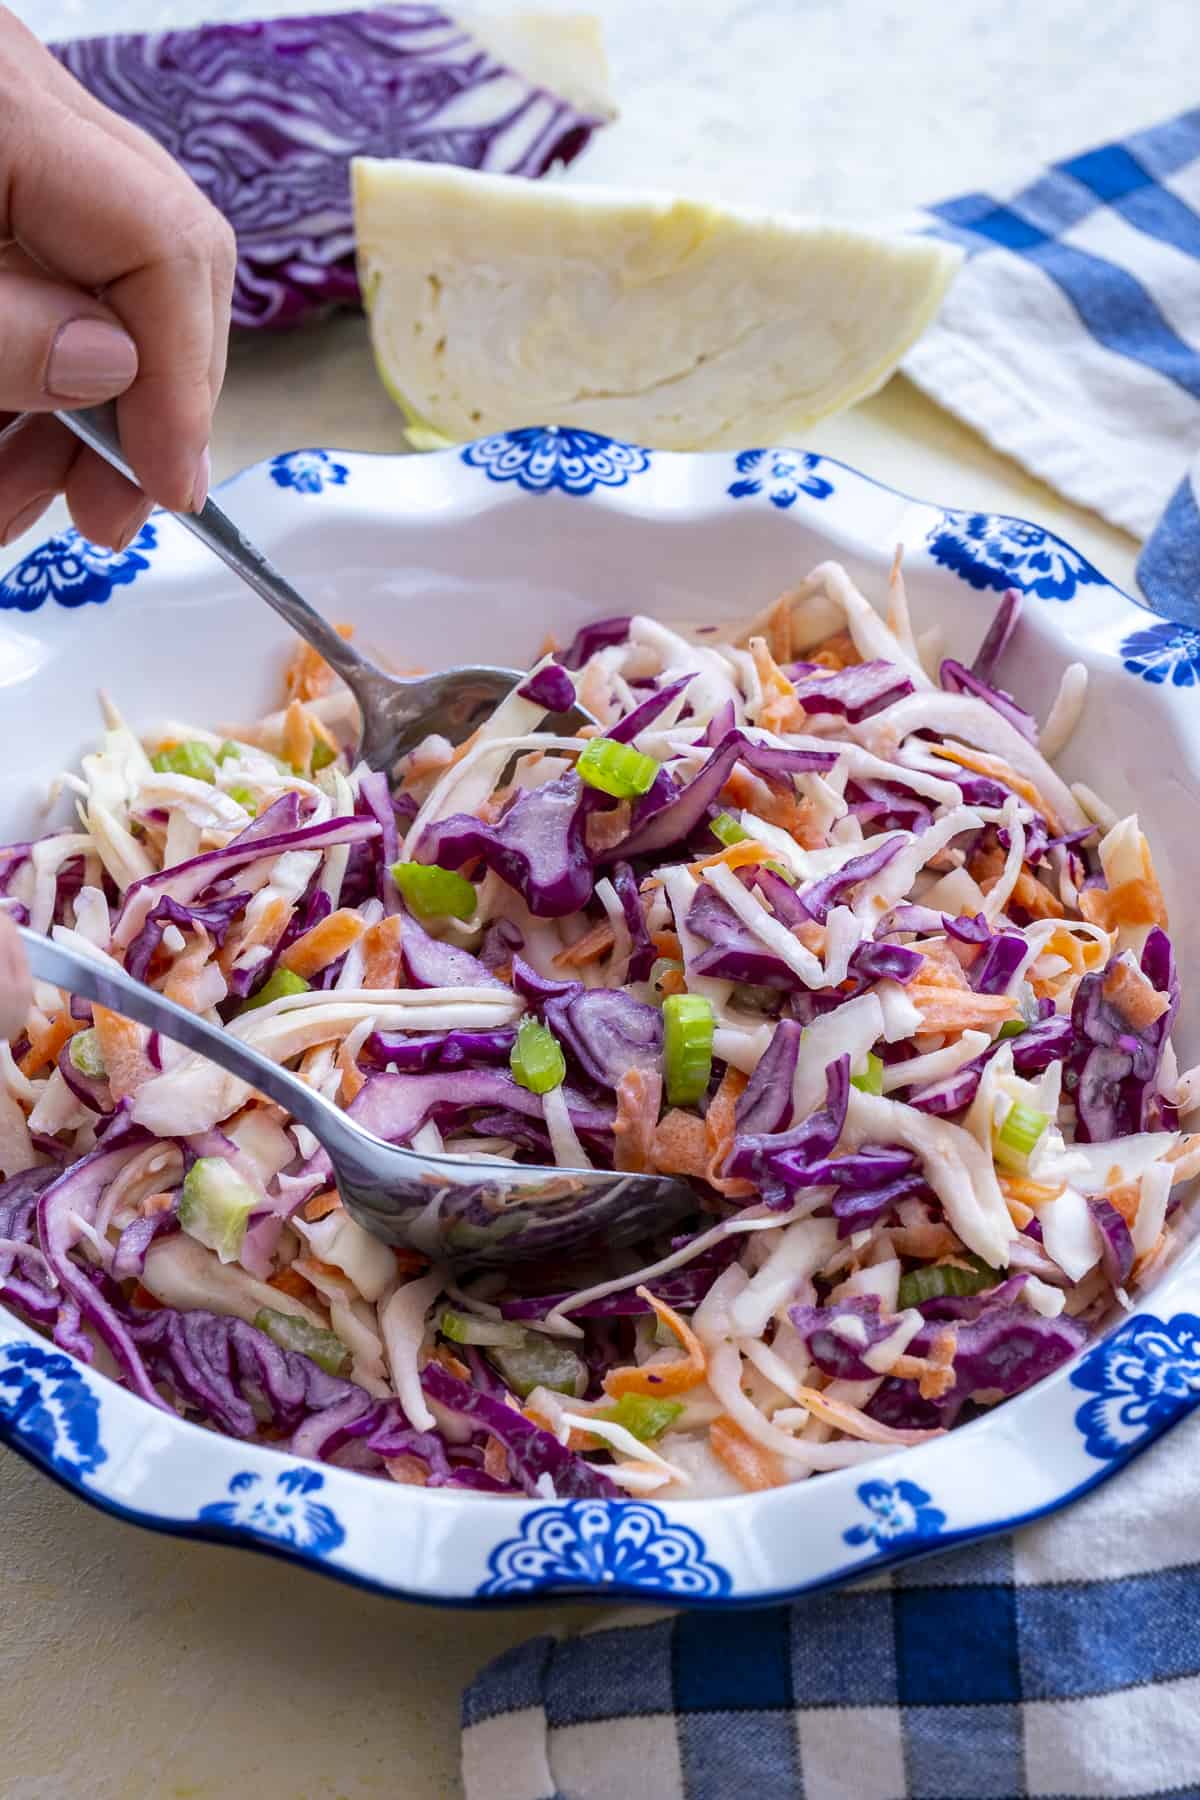 Hands tossing coleslaw mixture in a white bowl.